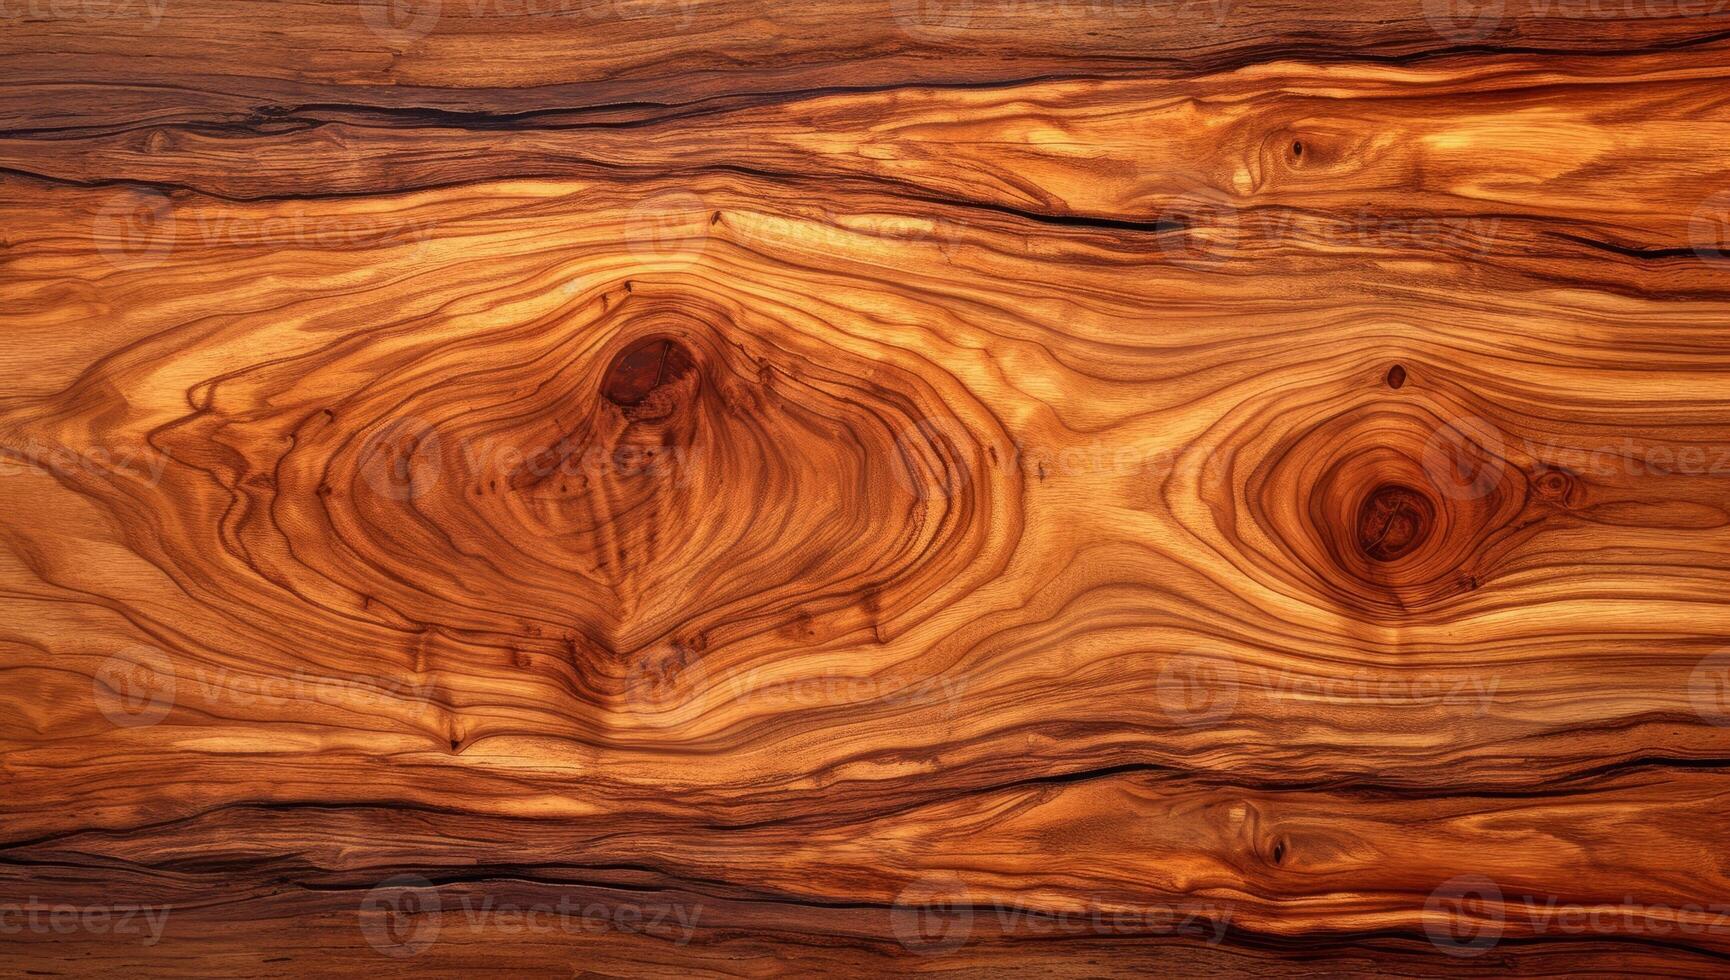 AI generated Stunning wood grain texture showing intricate patterns and swirls. Abstract natural background of polished olive wood surface. photo